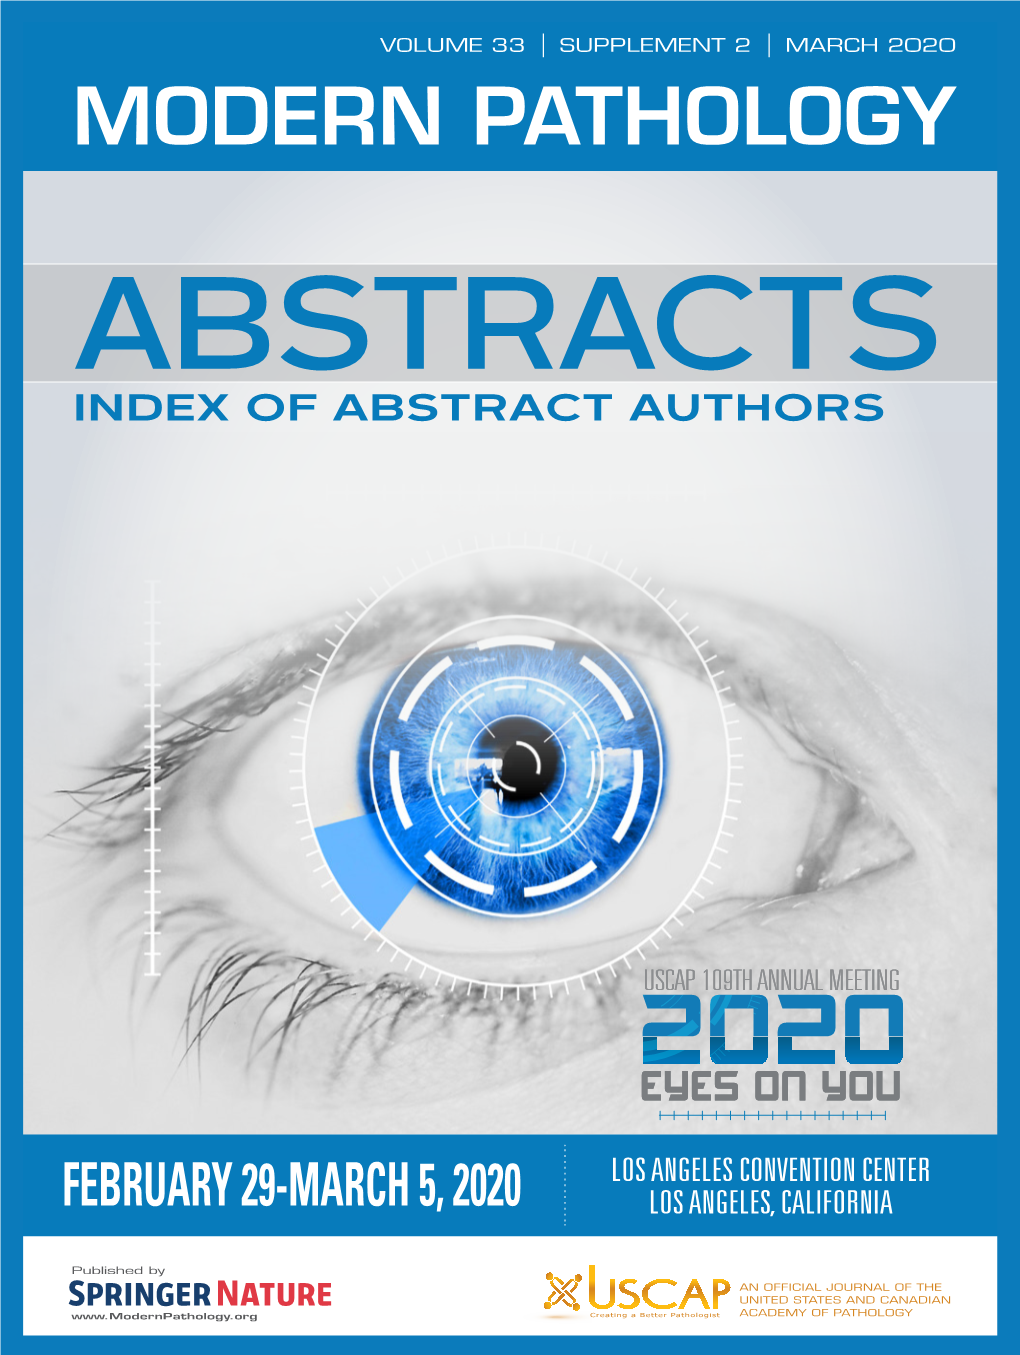 Modern Pathology Abstracts Index of Abstract Authors